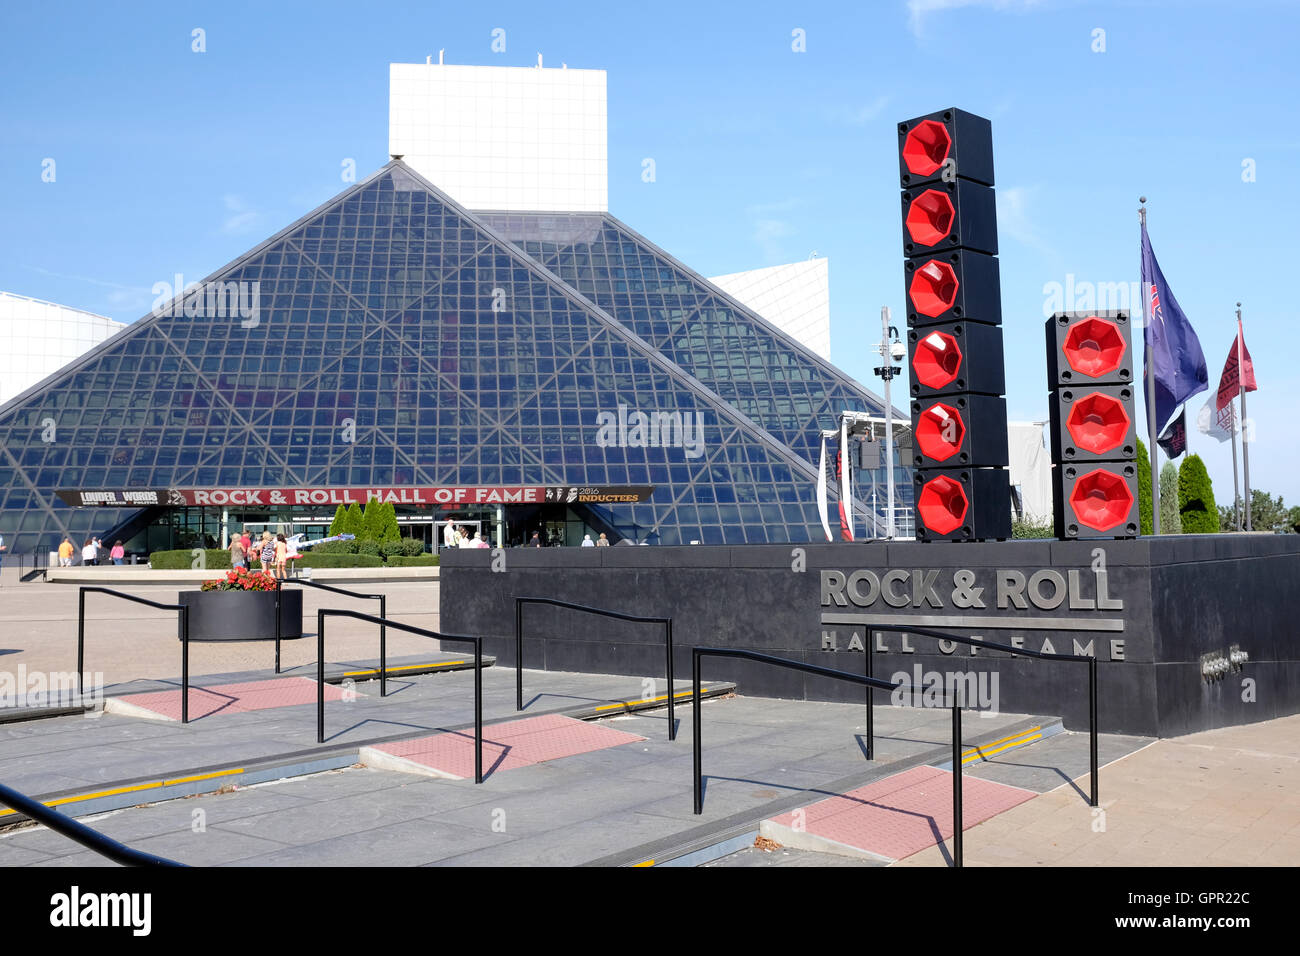 Rock and Roll Hall of Fame, Cleveland, Ohio Stock Photo